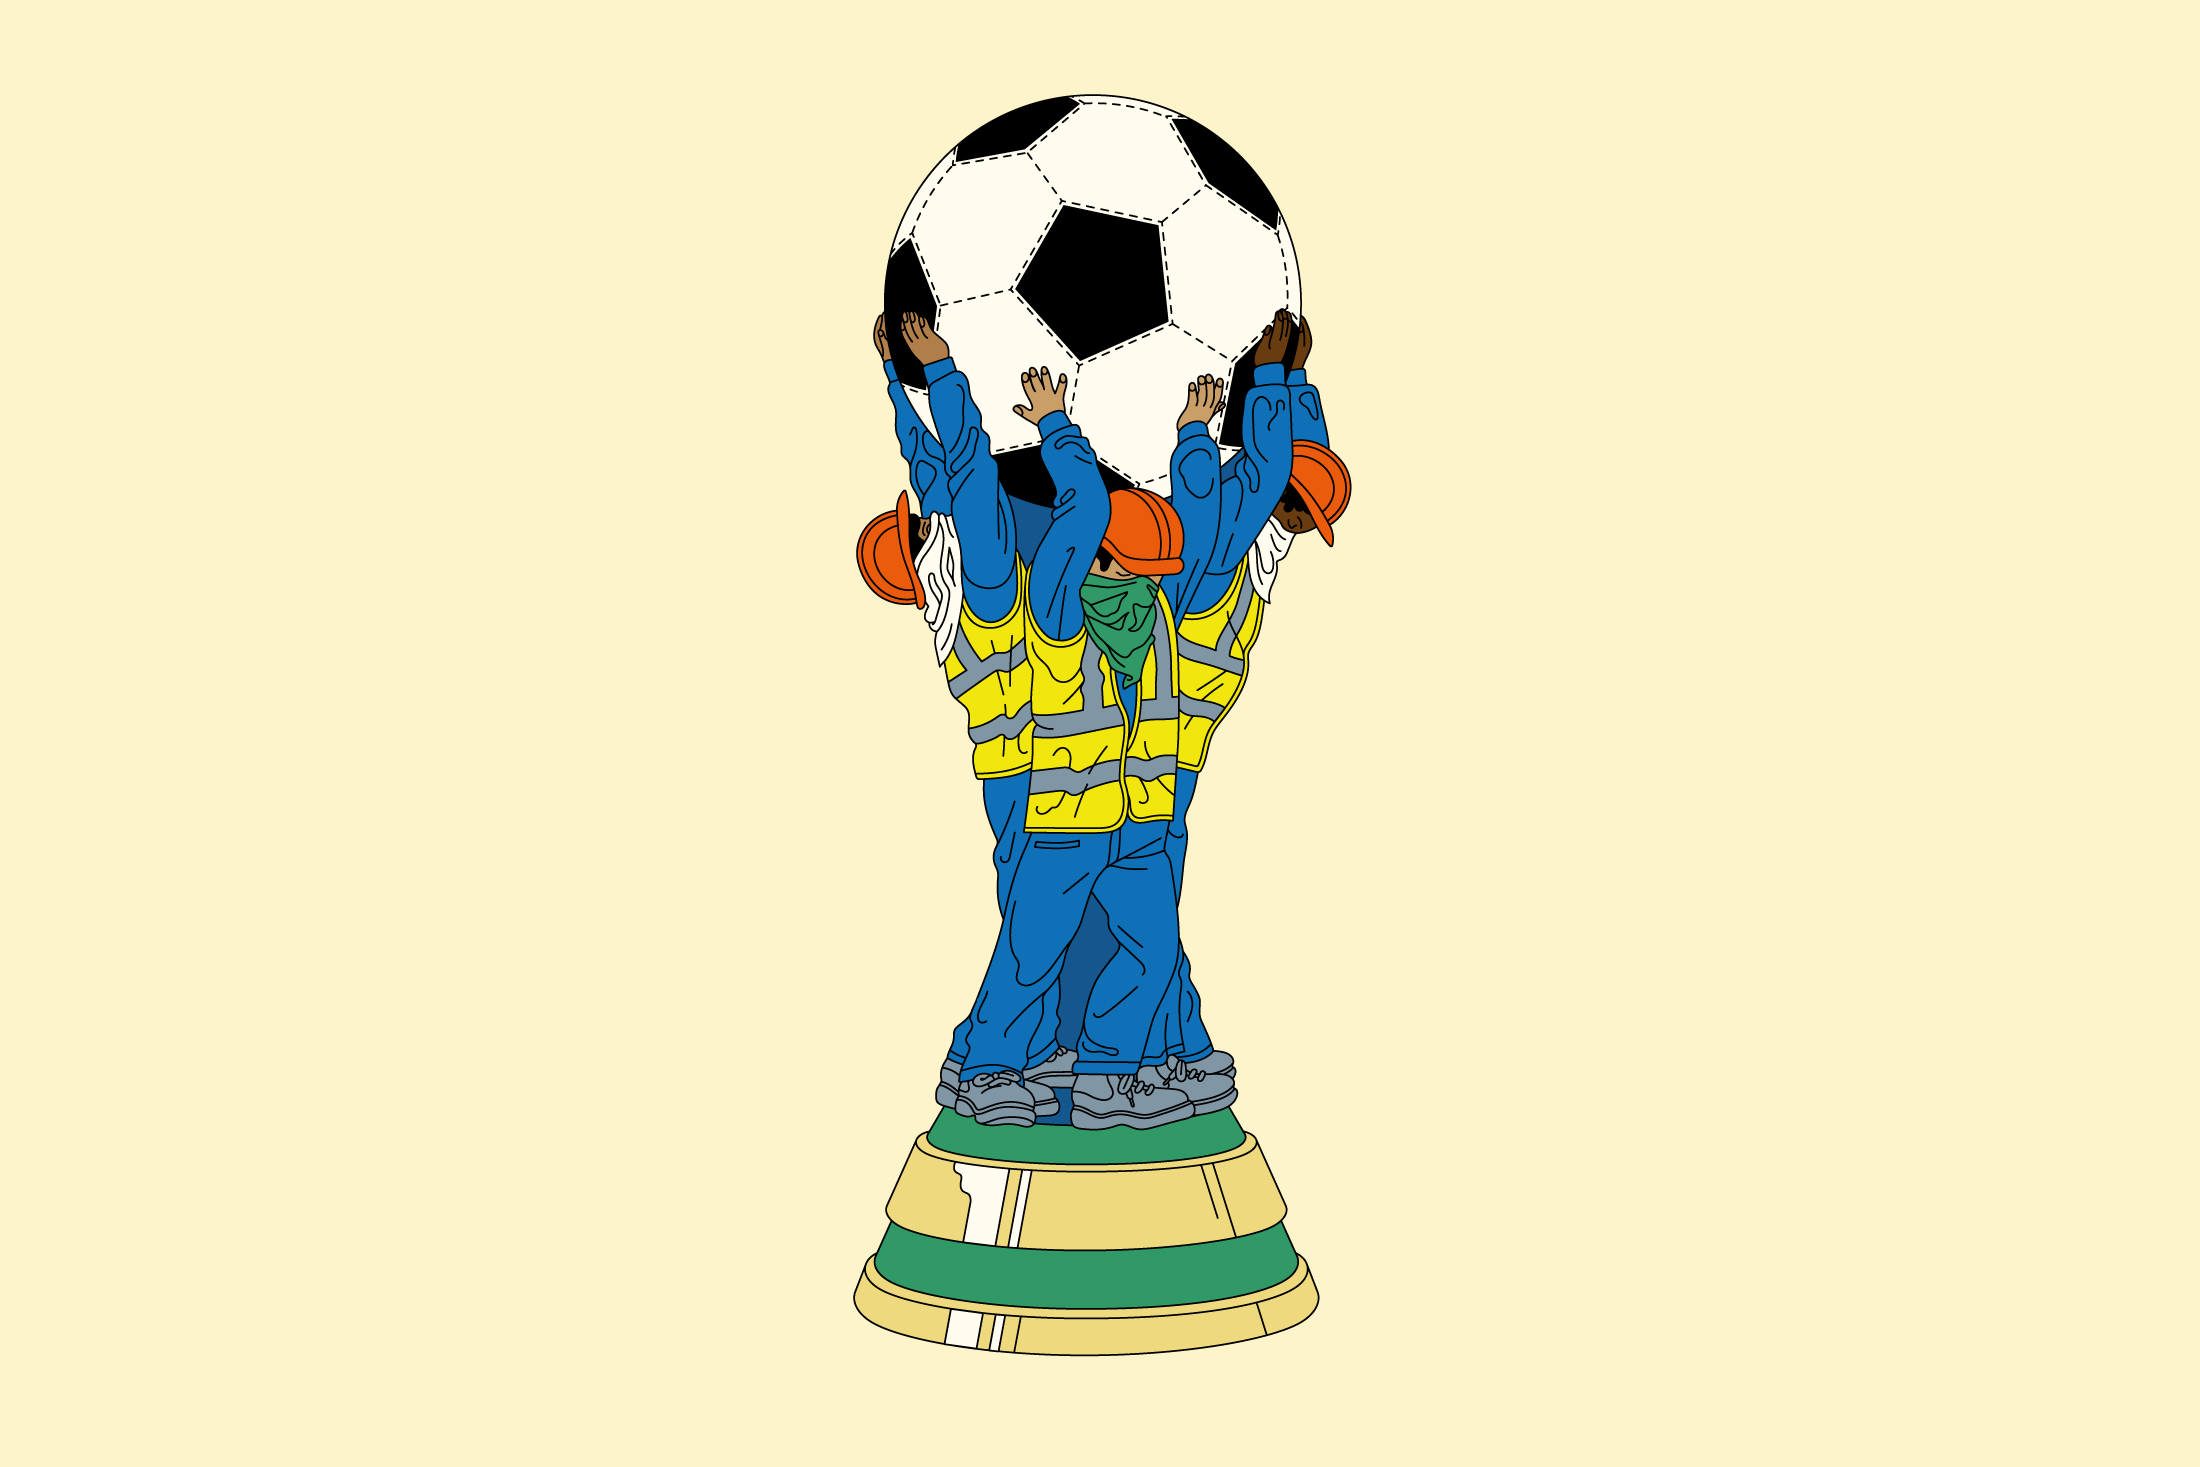 Qatar World Cup 2022 Shows Middle East Sportswashing Goals - Bloomberg